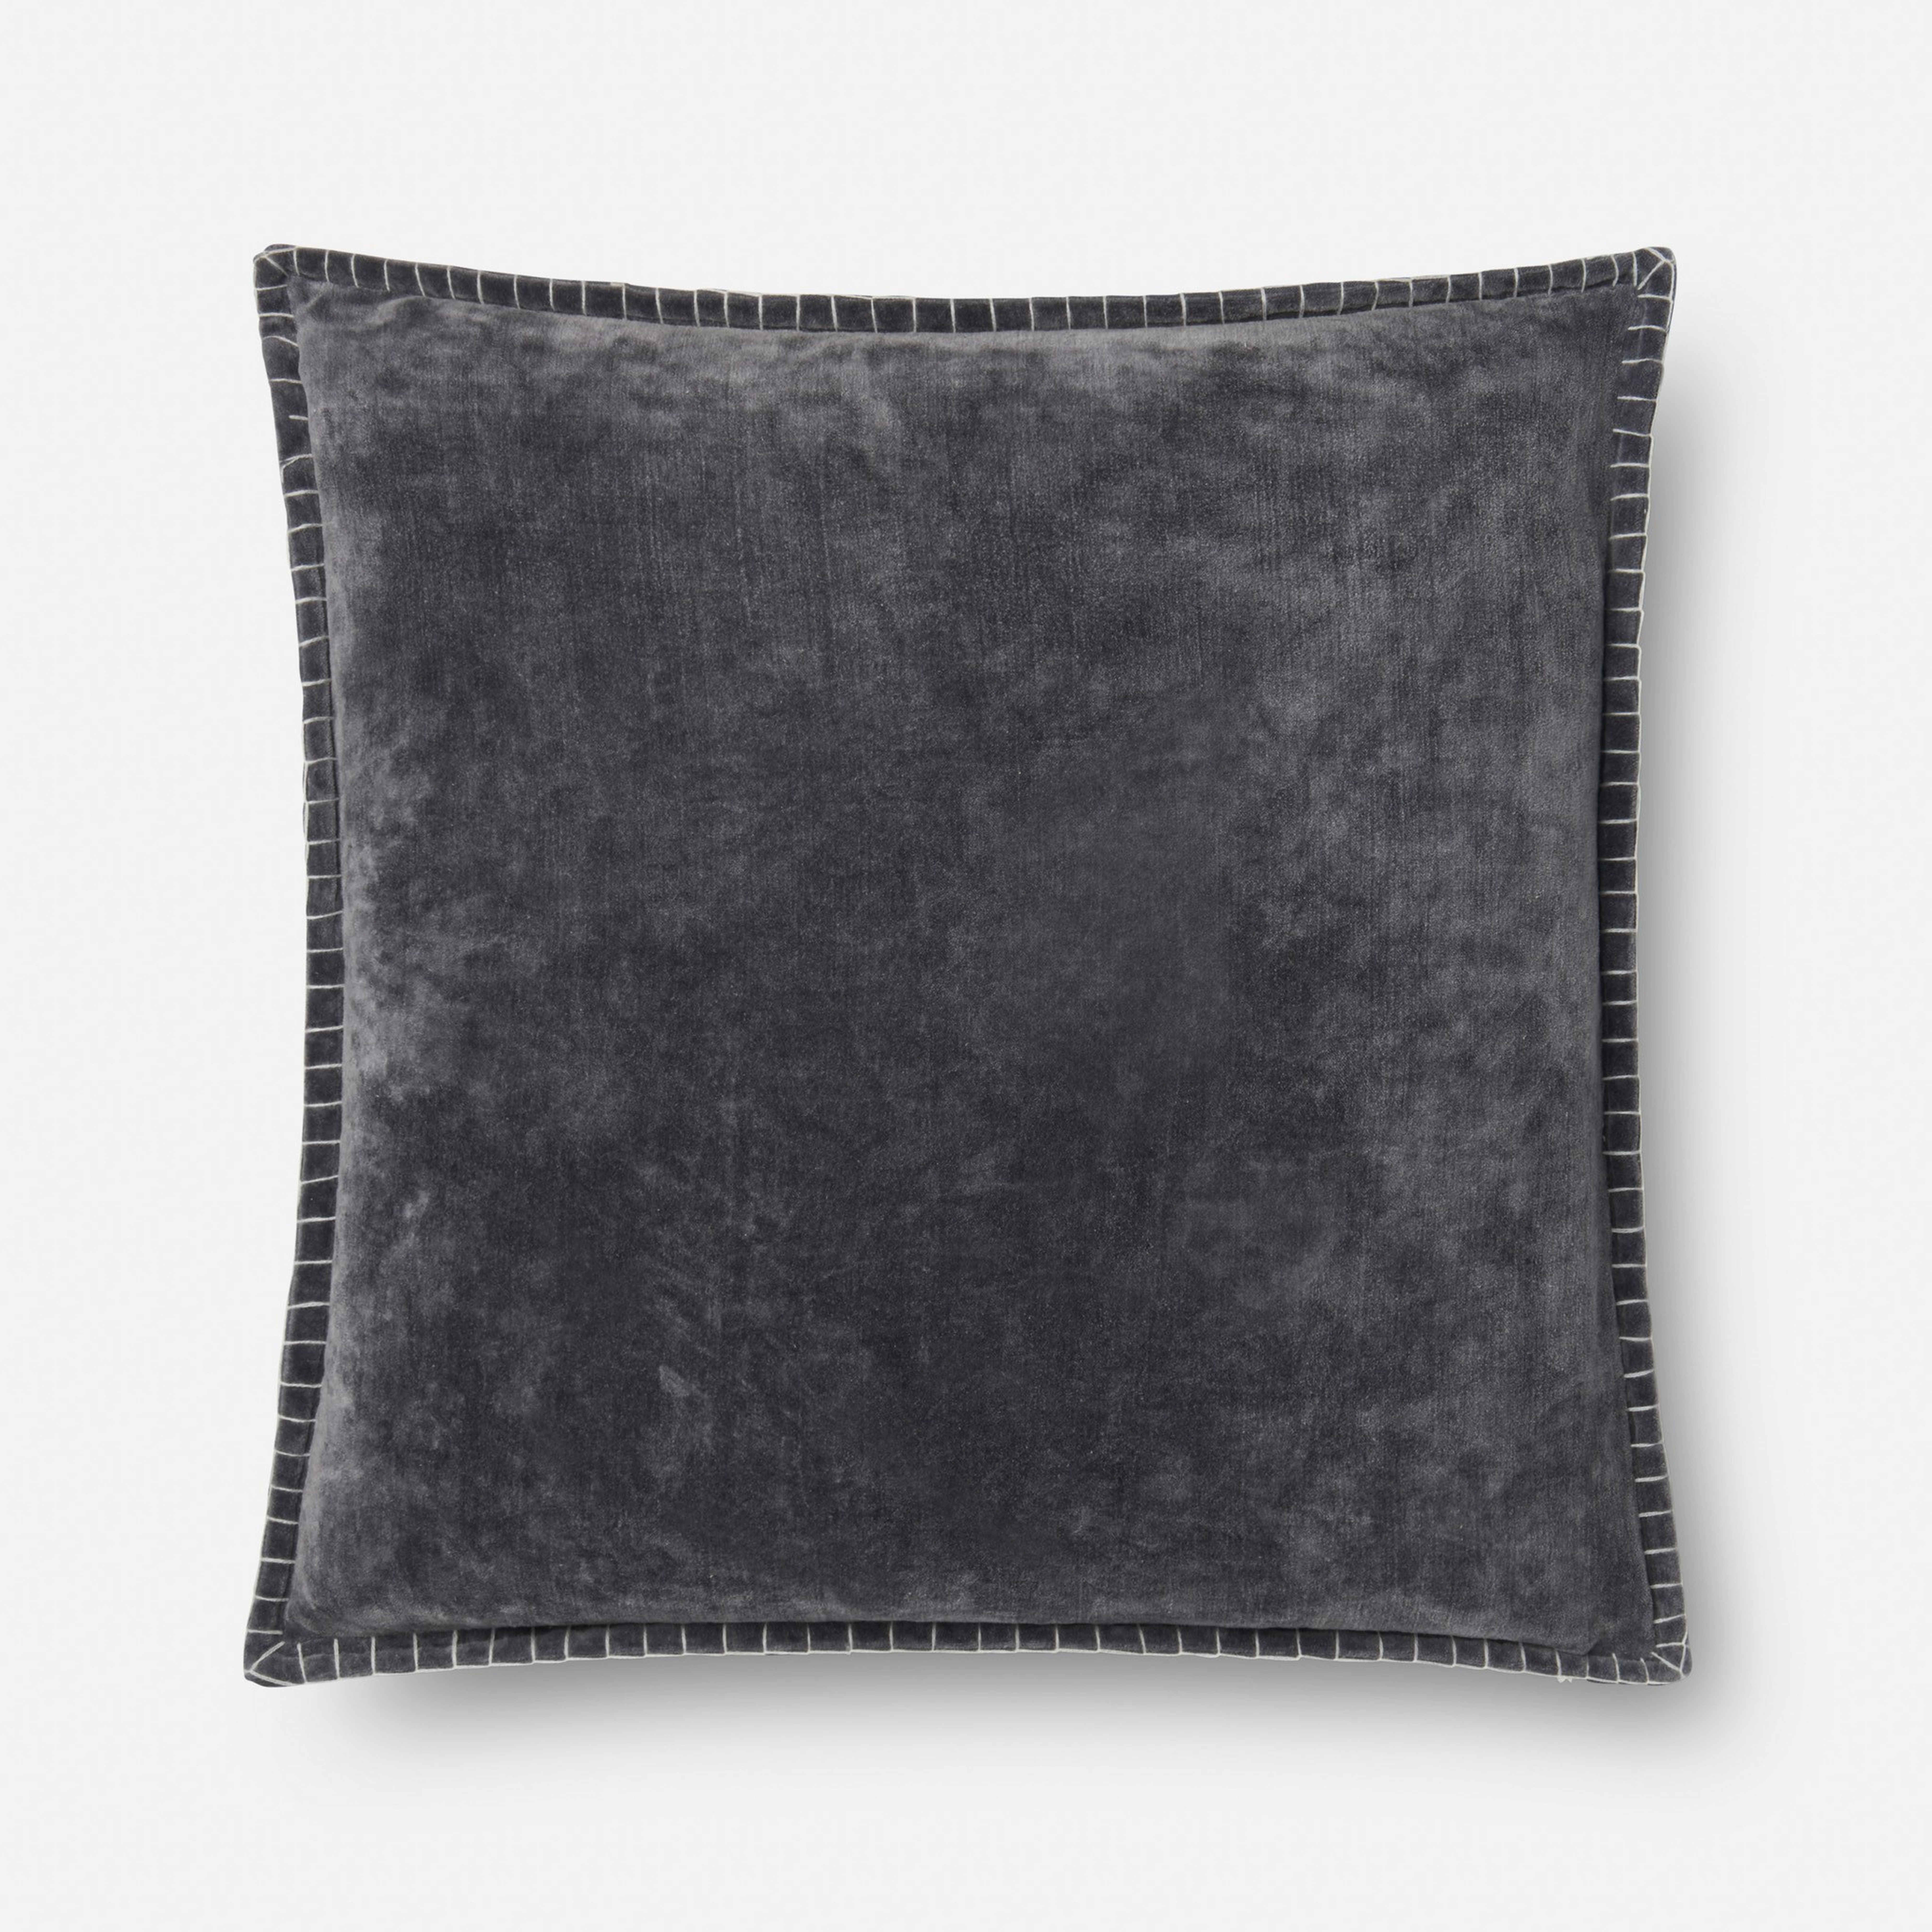 PILLOWS - GREY - 22" X 22" with down insert - Loma Threads